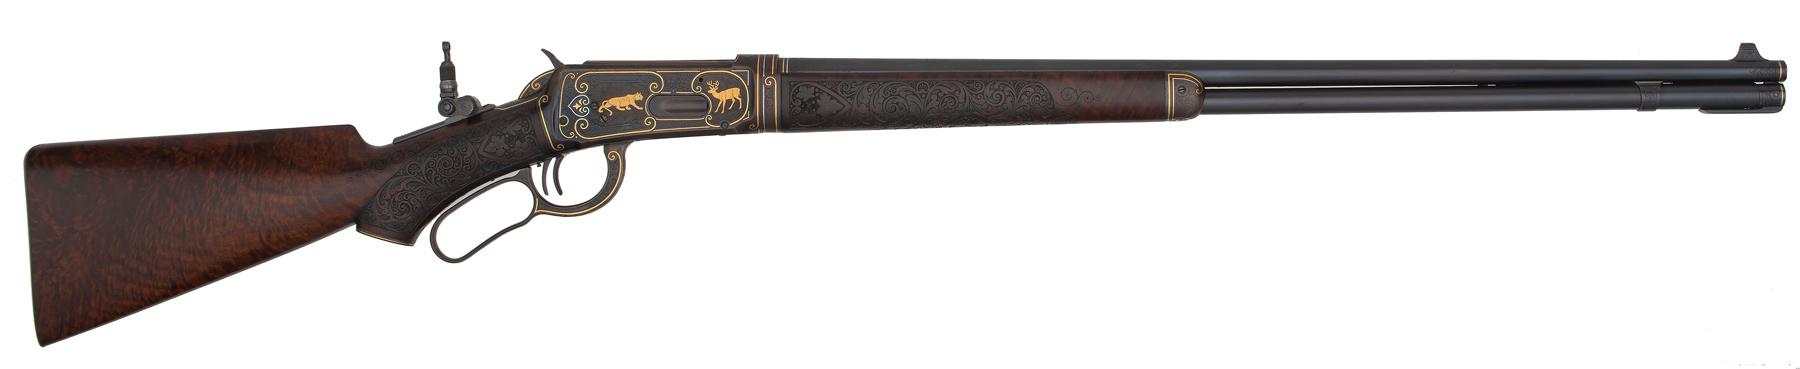 Antique Deluxe Grade 1 Factory Gold Inlaid and Carved Ulrich Engraved Winchester Model 1894 Takedown